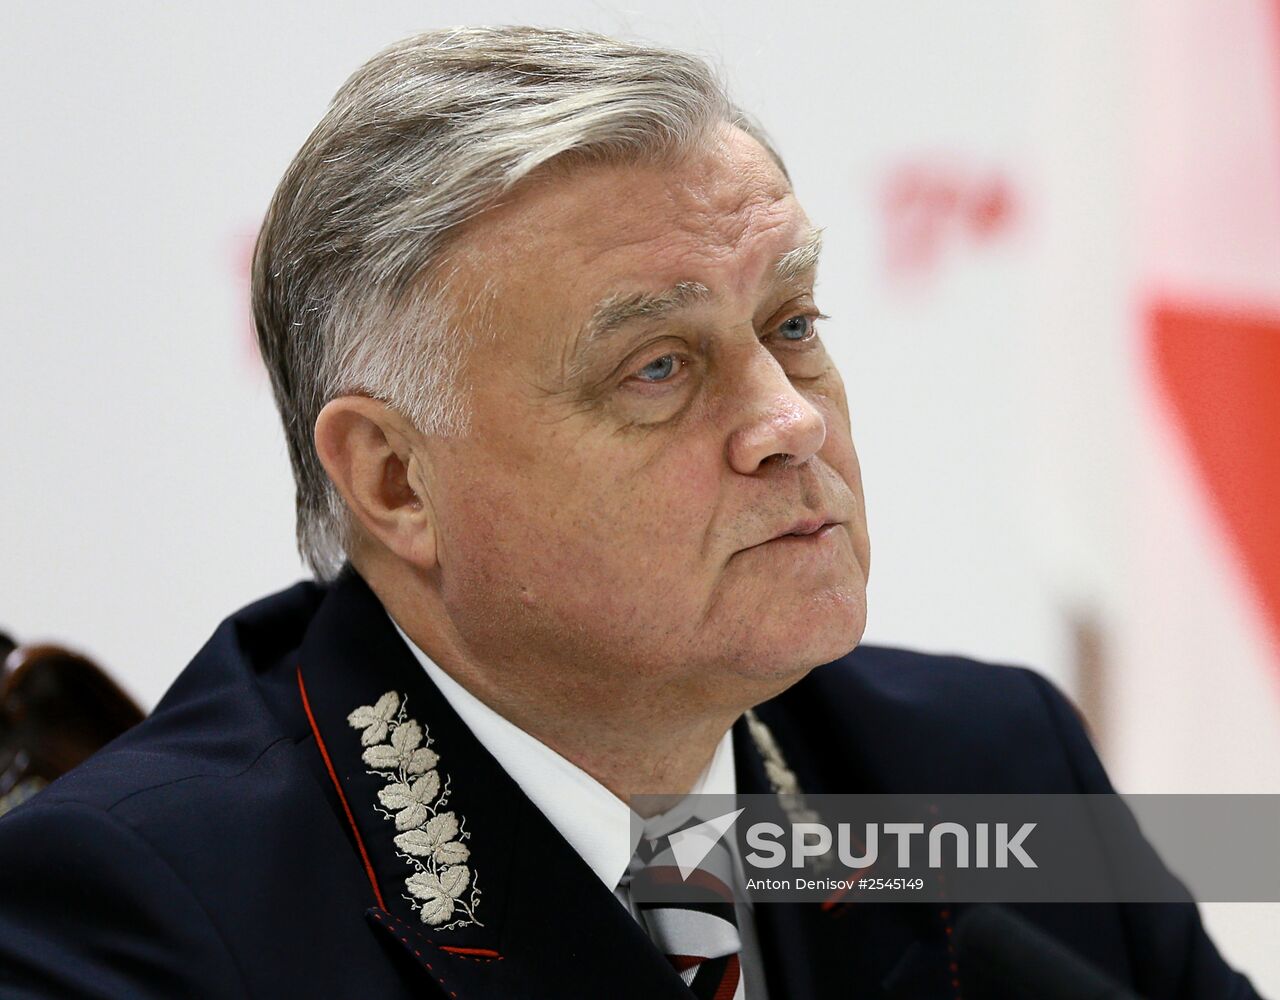 Russian Railways chief Vladimir Yakunin stages news conference